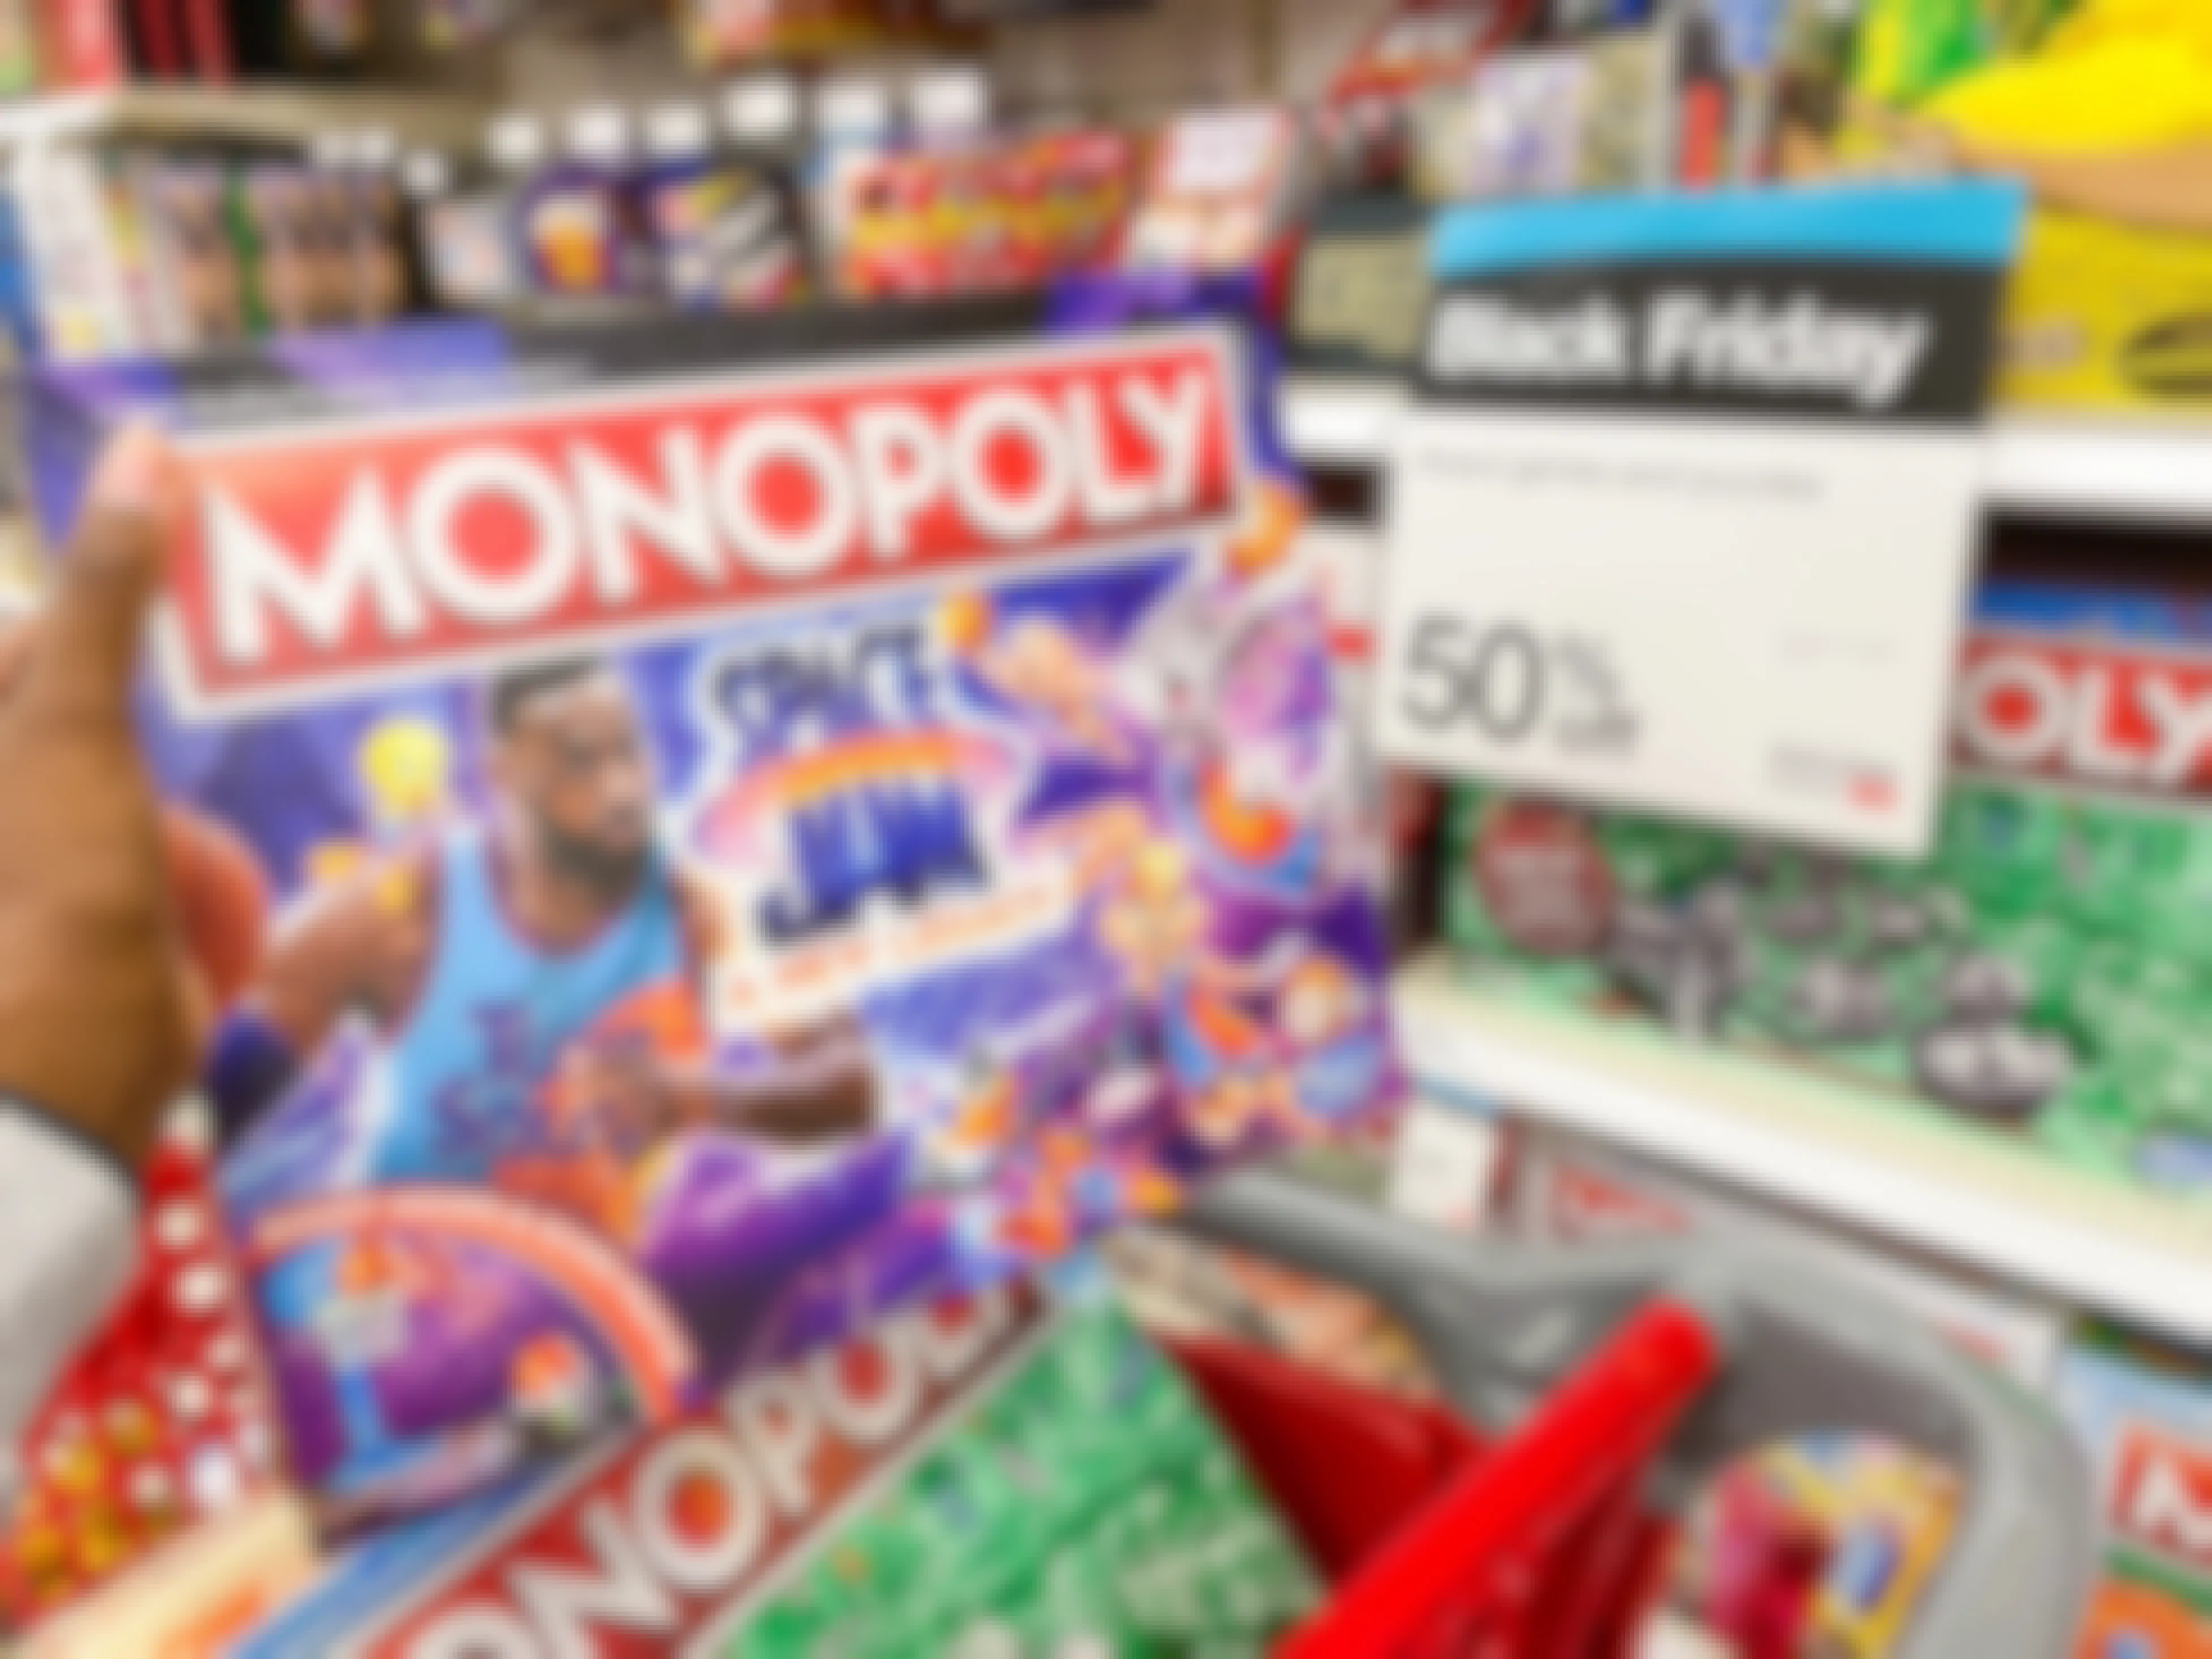 Monopoly games in a shopping cart next to a sign that says 50% off for Black Friday